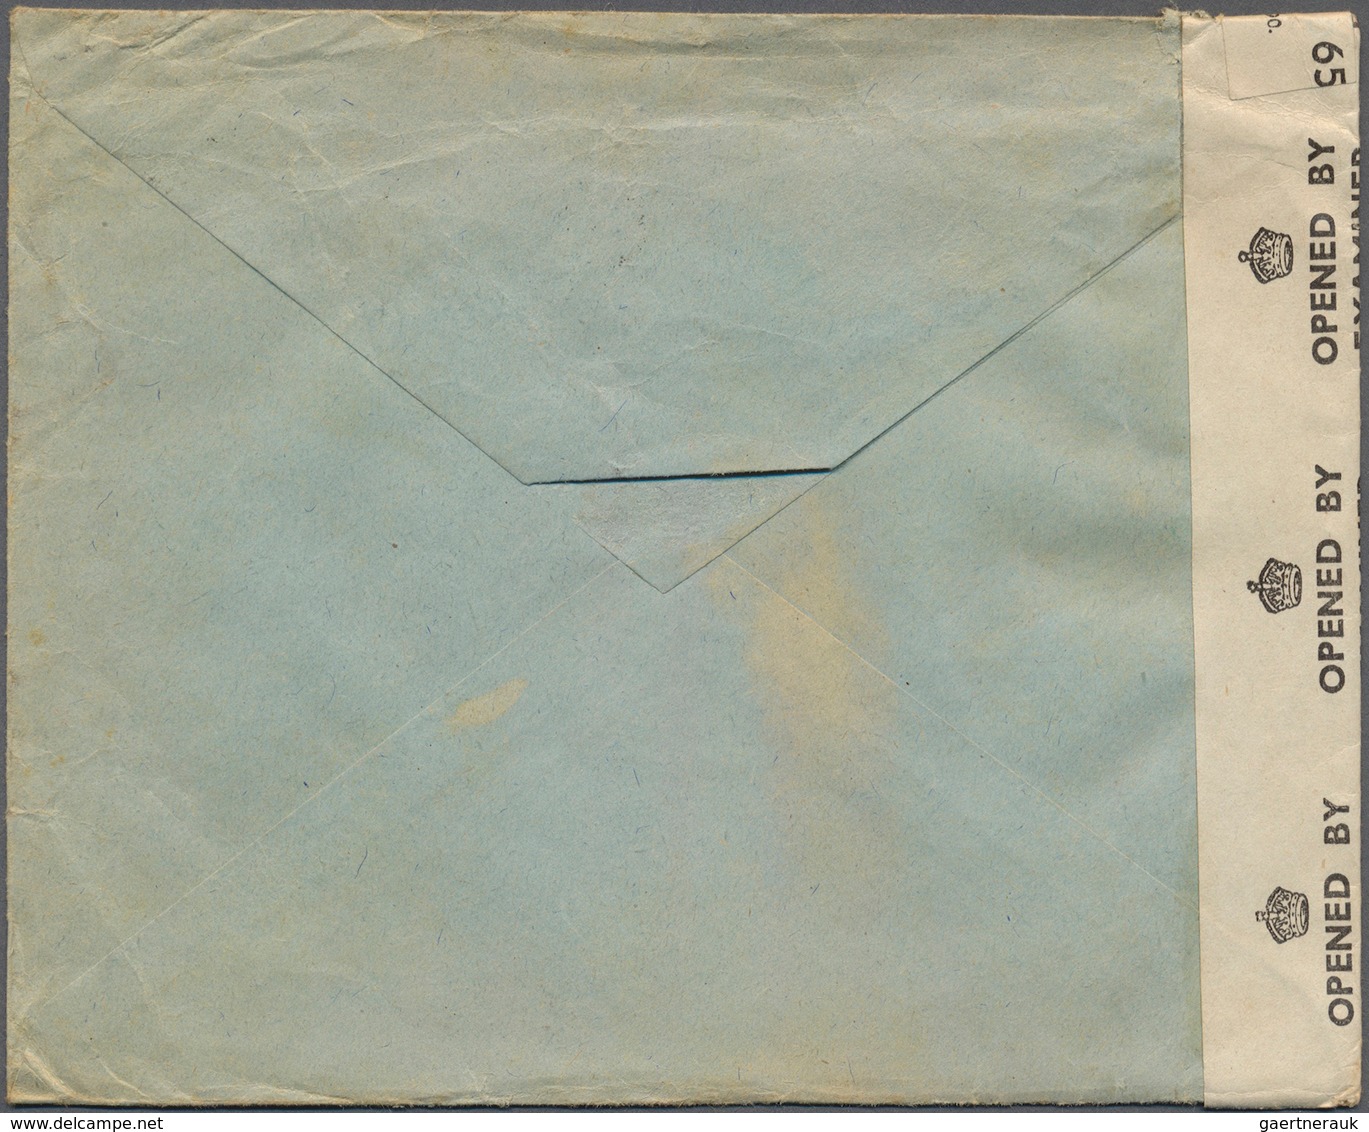 Tanger - Britische Post: 1944. Envelope Addressed To The 'Free French National Liberation Committee, - Postämter In Marokko/Tanger (...-1958)